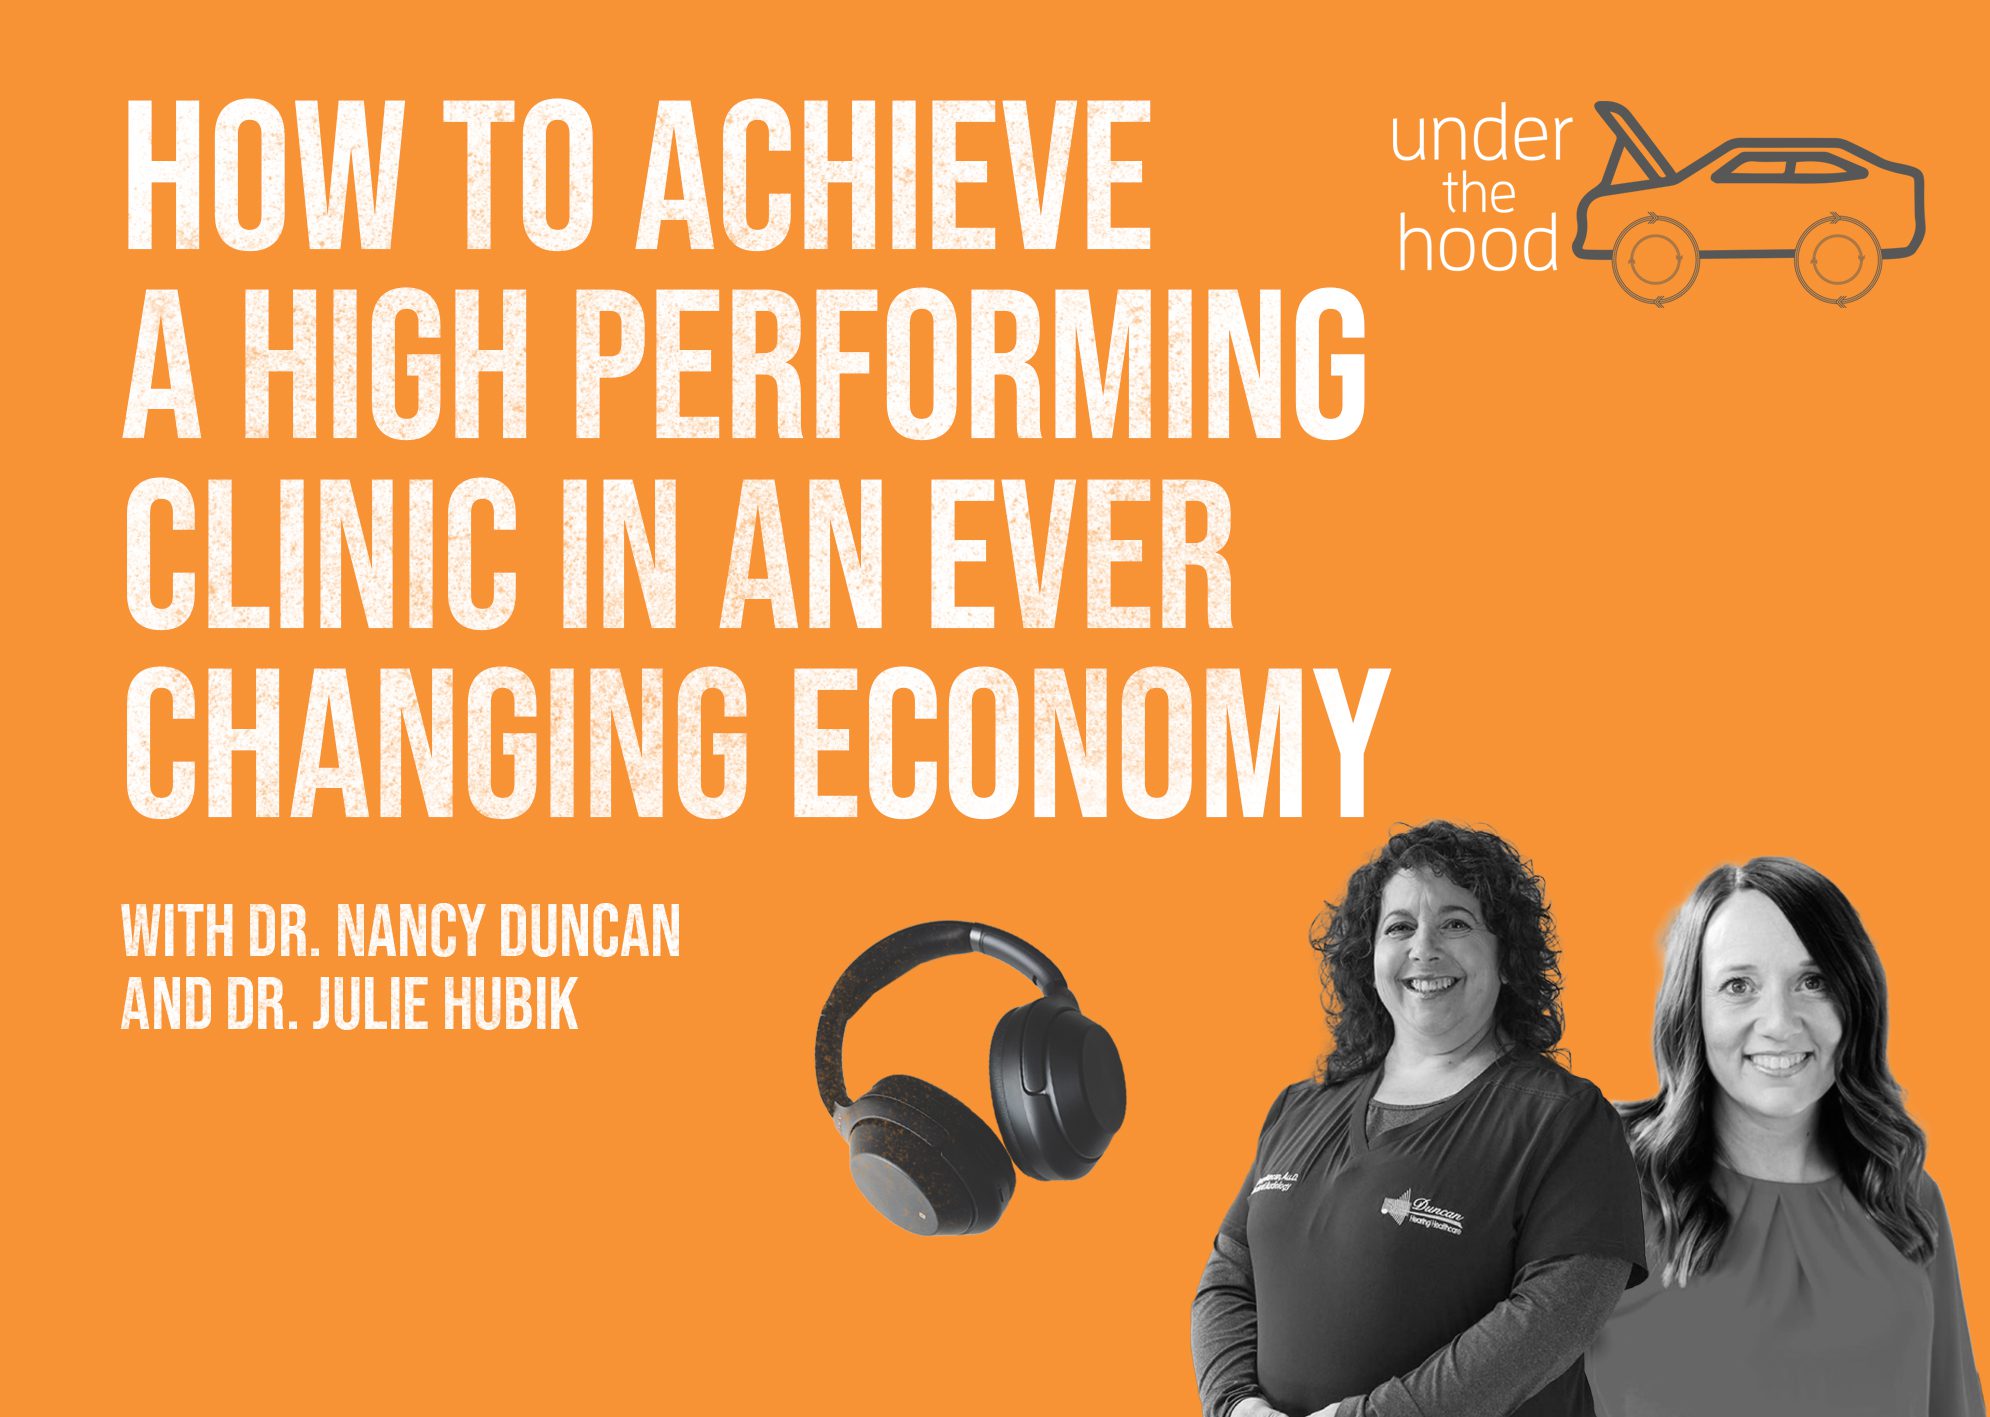 how to achieve a high-performing clinic image with Nancy Duncan and Julie Hubik image